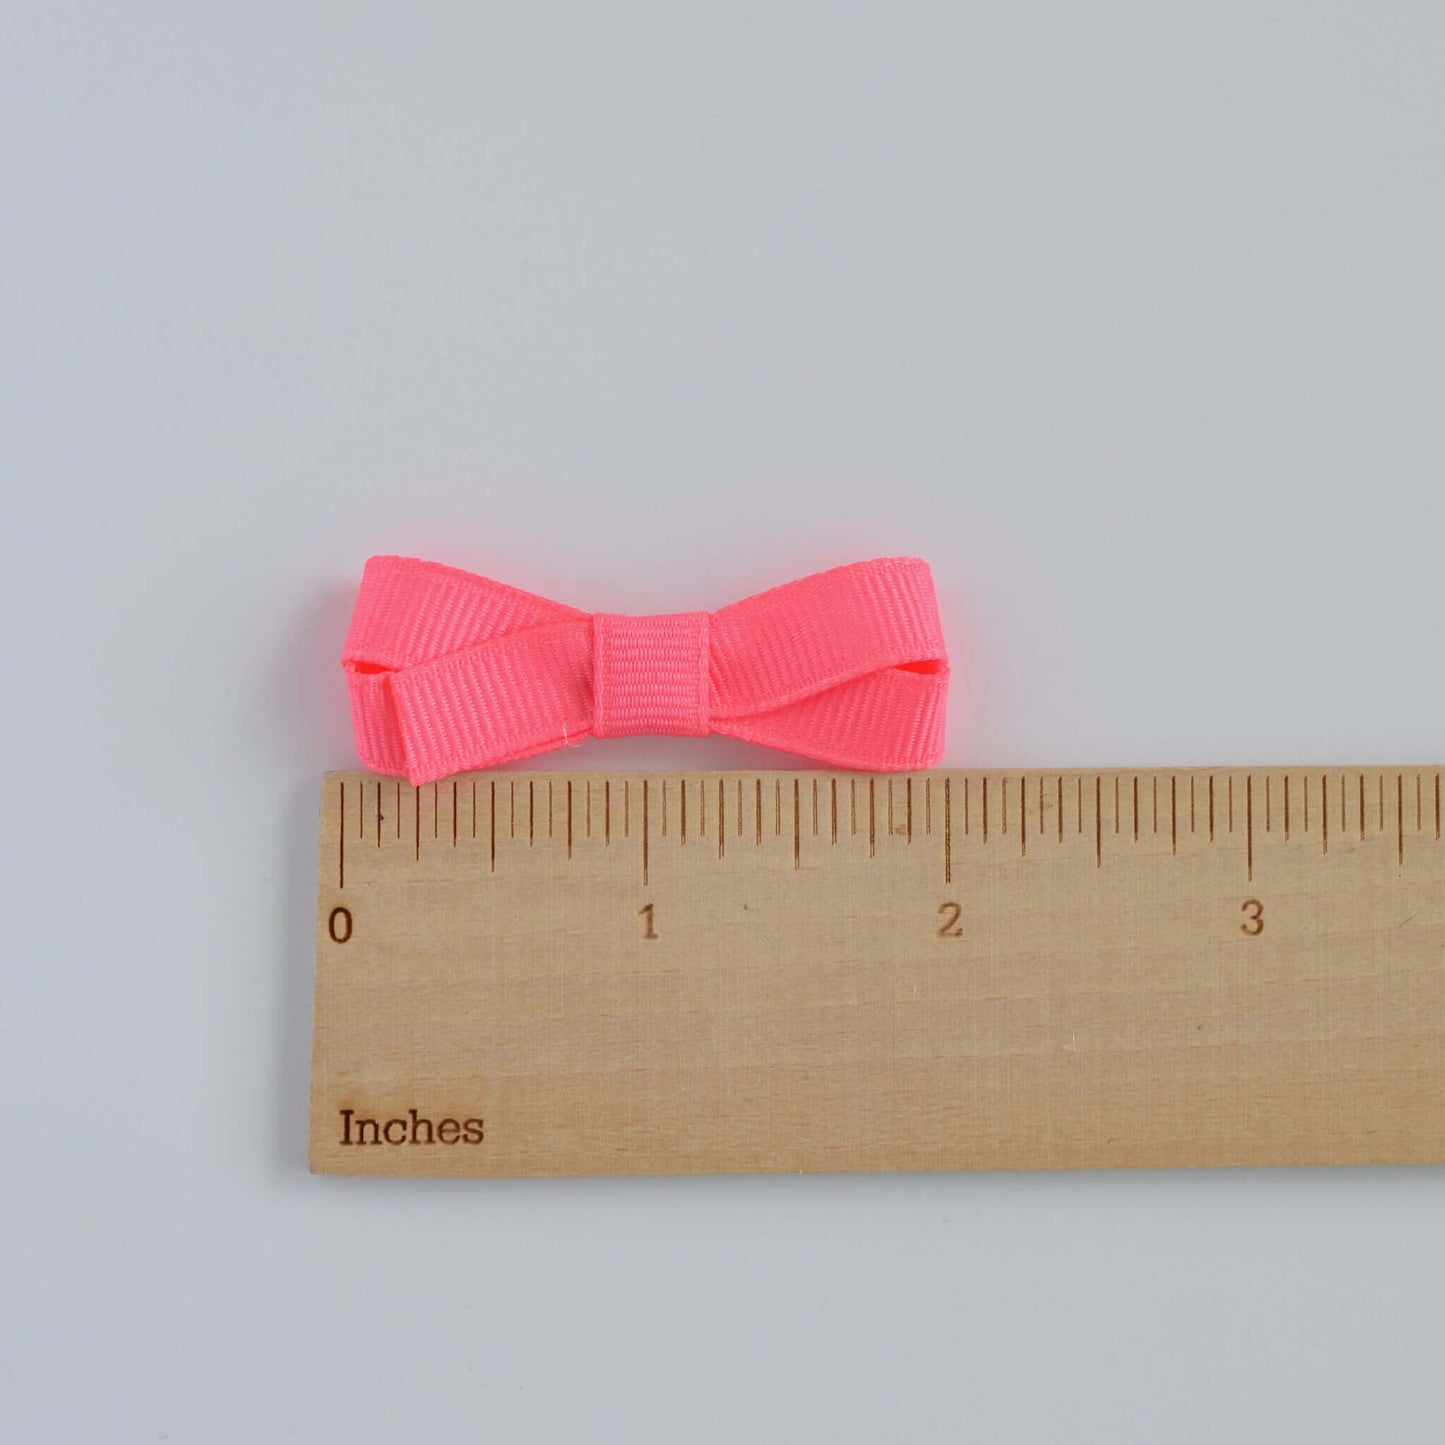 Bright pink mini grosgrain hair bow next to ruler for size reference, perfect for baby and toddler girls, with a snap clip and no-slip grip.